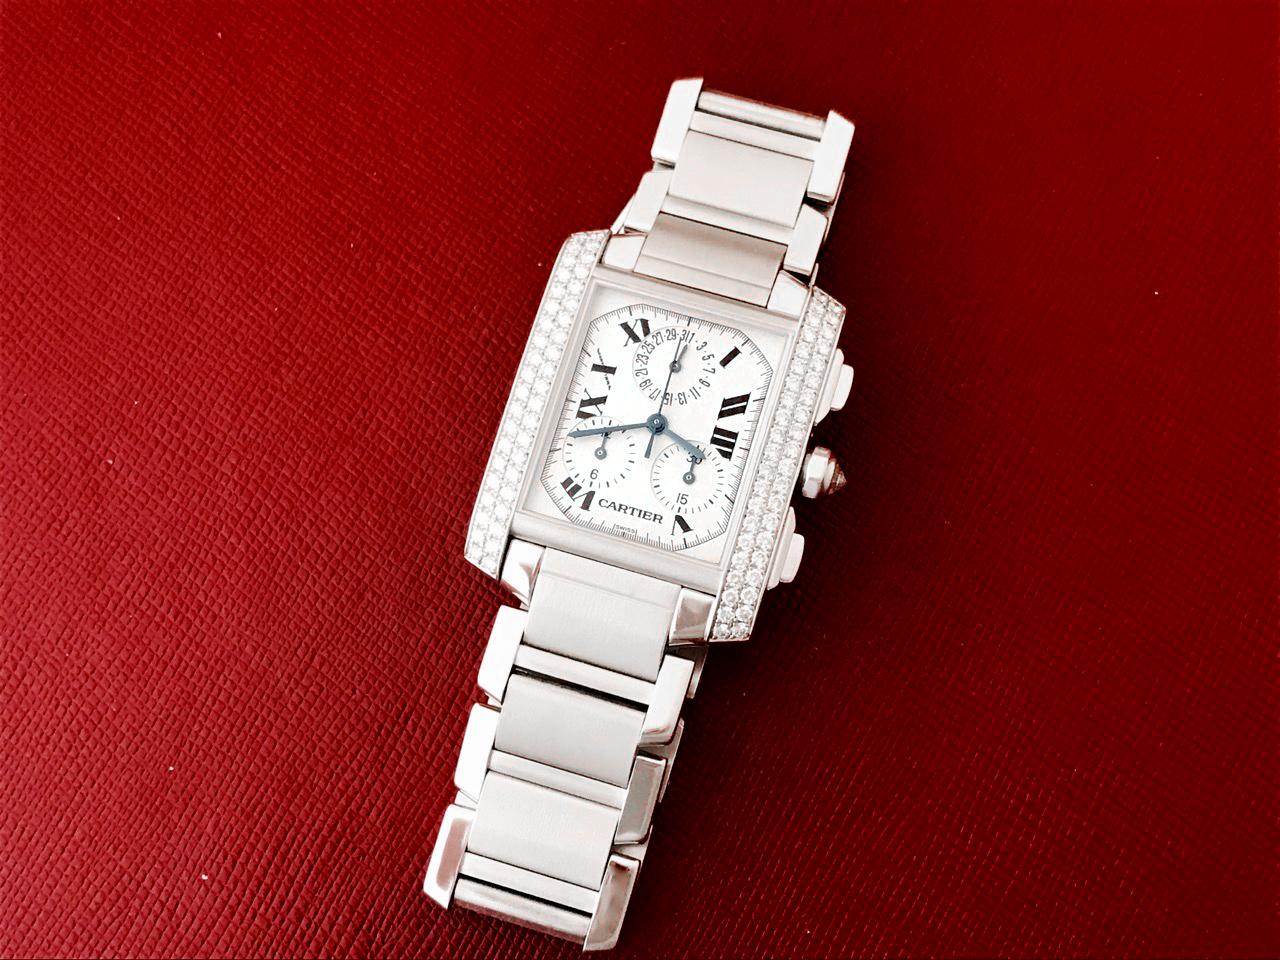 Cartier 18k White Gold Tank Francaise with Diamonds. Quartz movement with Date. Chronograph. 18K White Gold rectangular style case with Cartier two row Diamond bezel (28x36mm). 18k White Gold Cartier bracelet with deployant clasp. Silvered Dial with